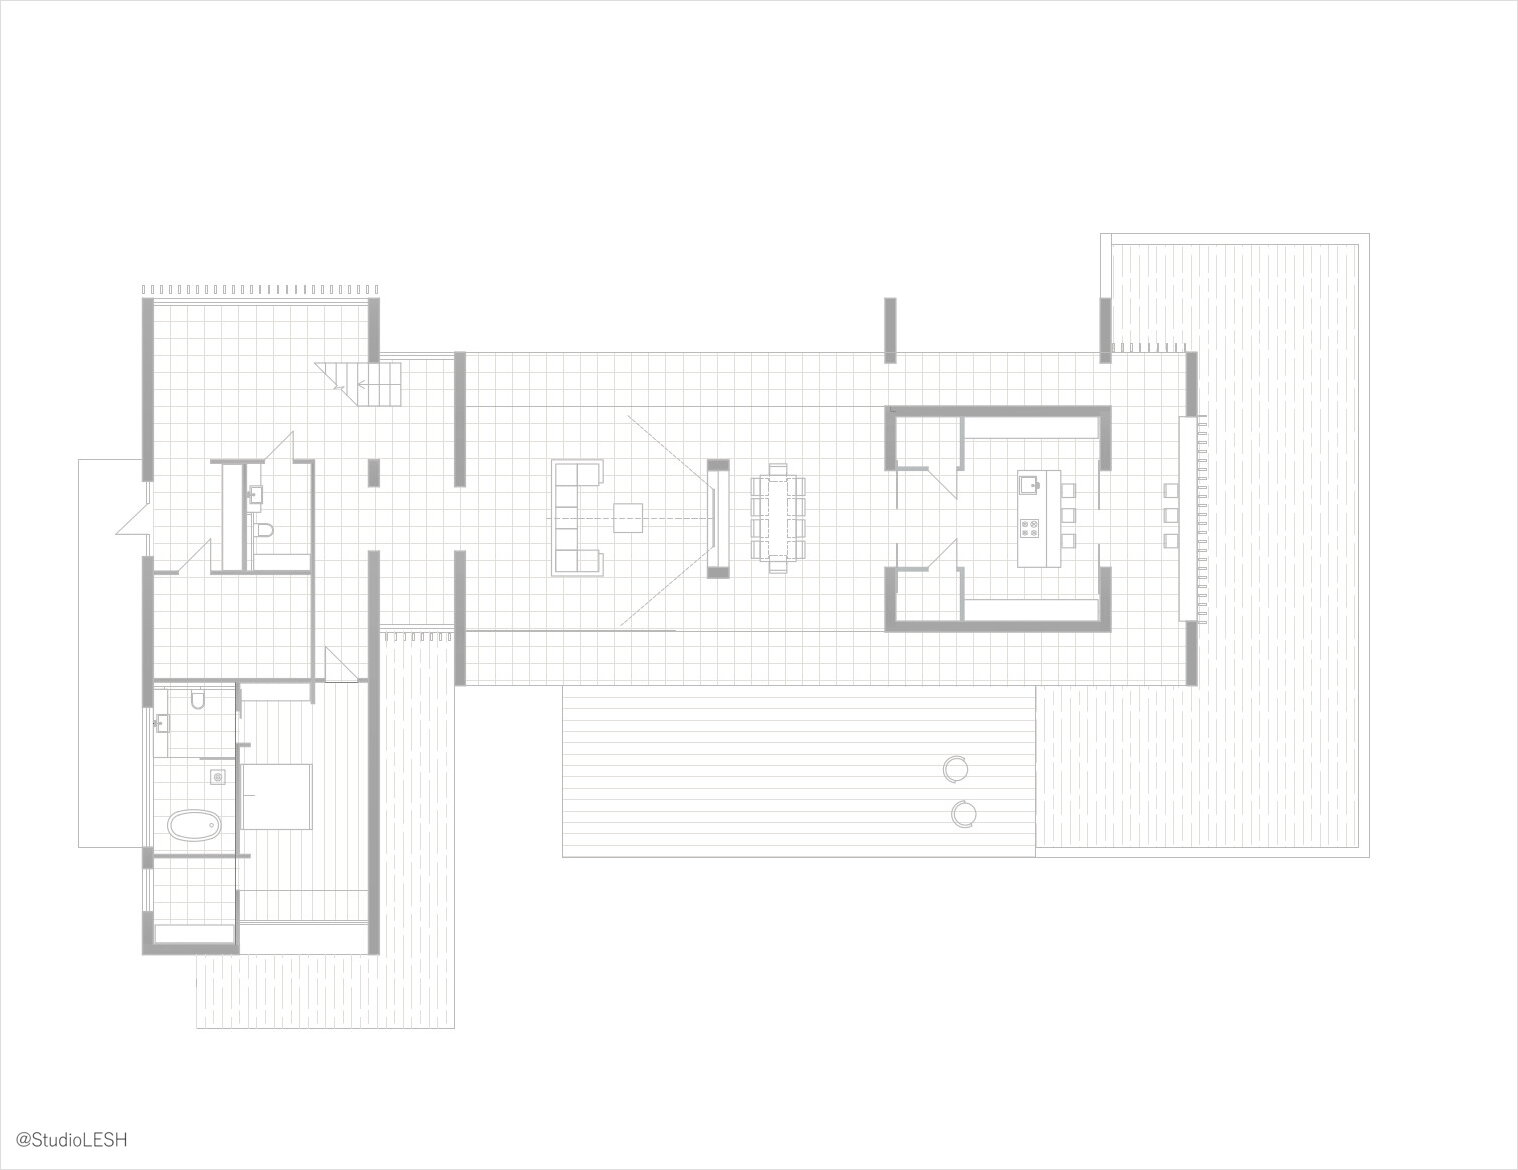 First floor plan of the house